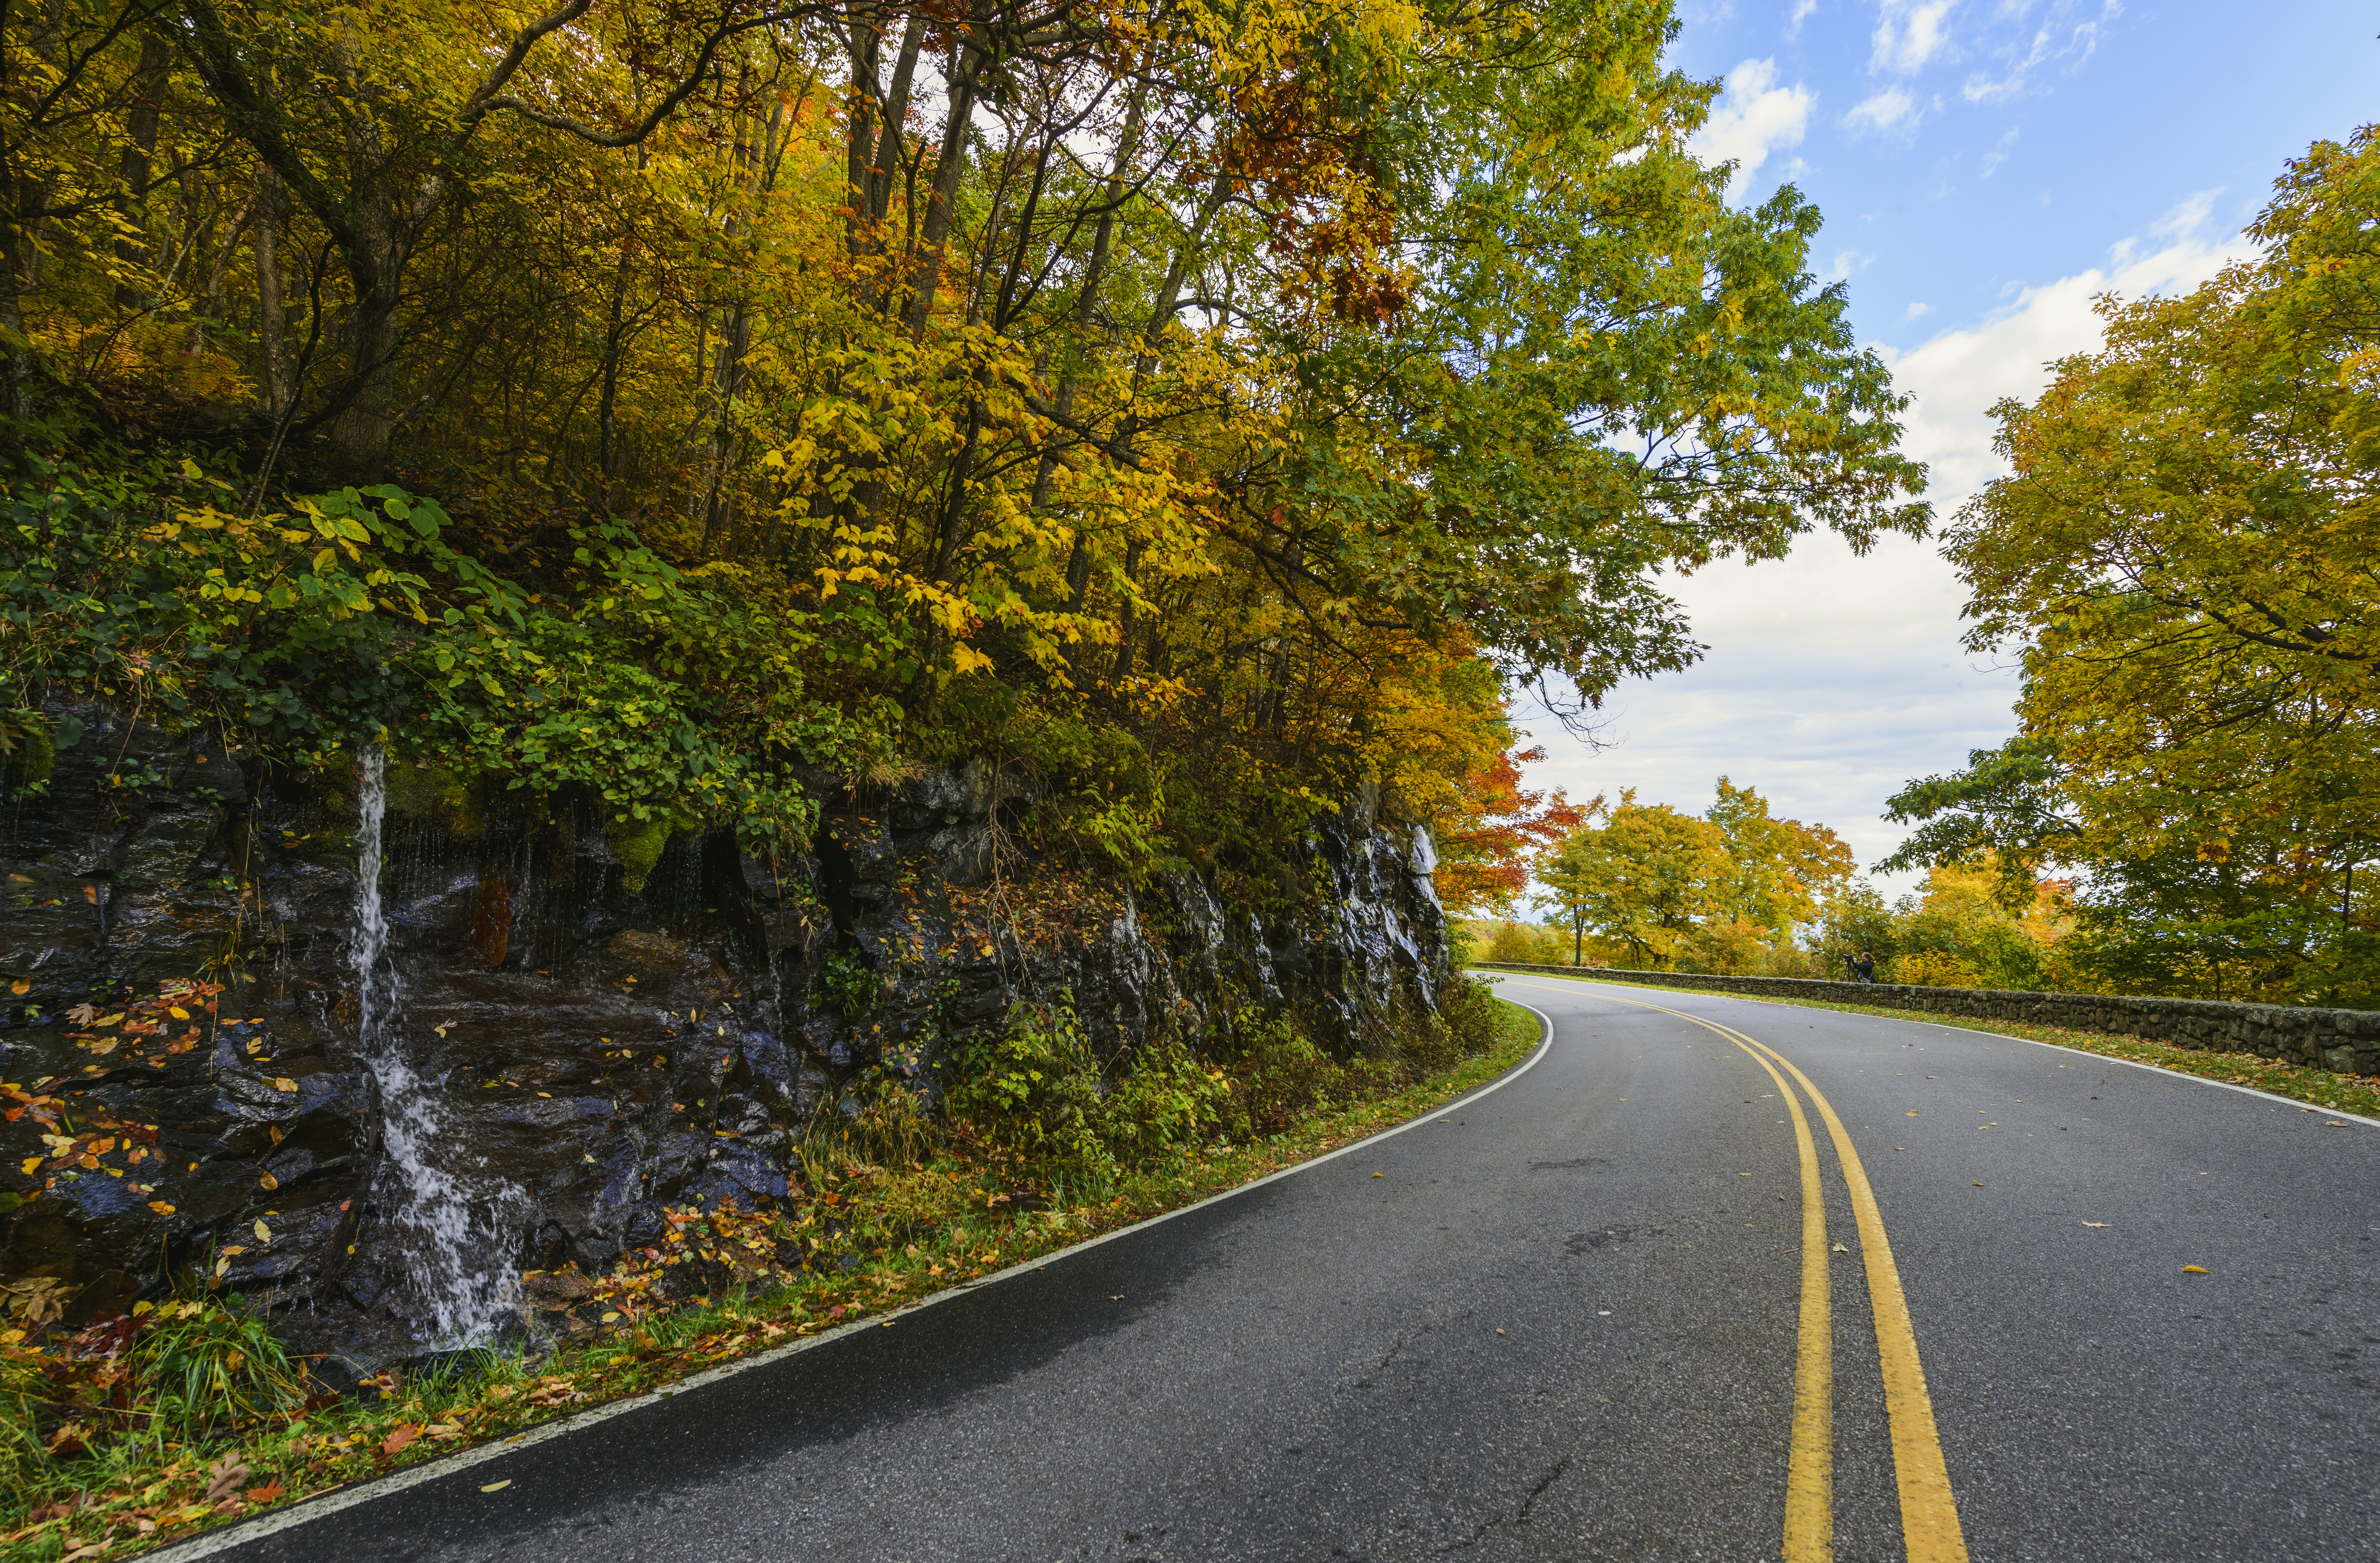 A road surrounded by fall foliage turns a curve around a small waterfall.